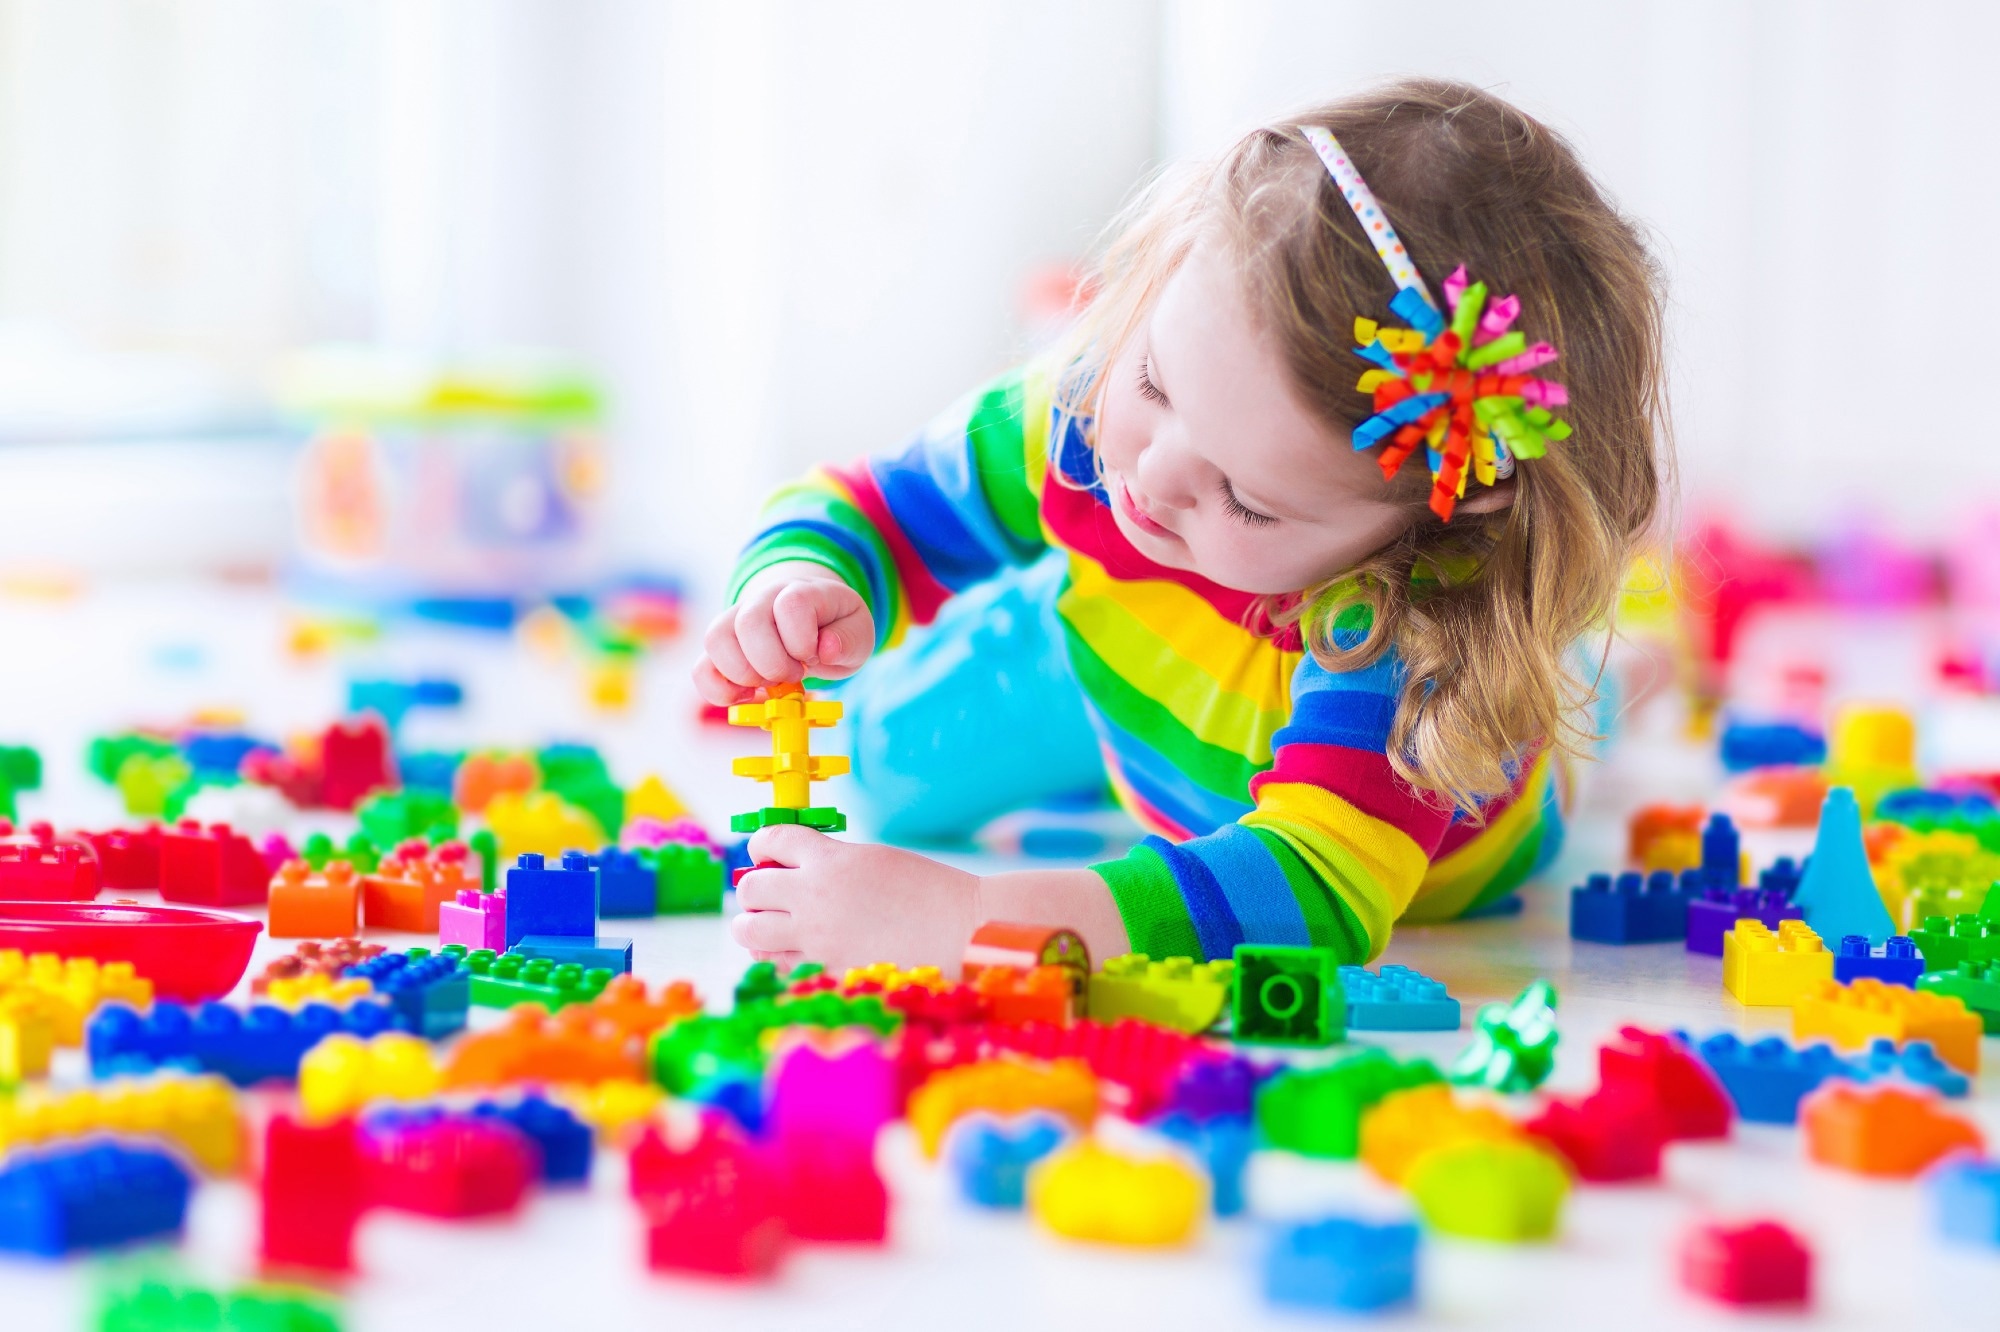 Study: Sustained benefits of early childhood education and care (ECEC) for young children’s development during COVID-19. Image Credit: FamVeld / Shutterstock